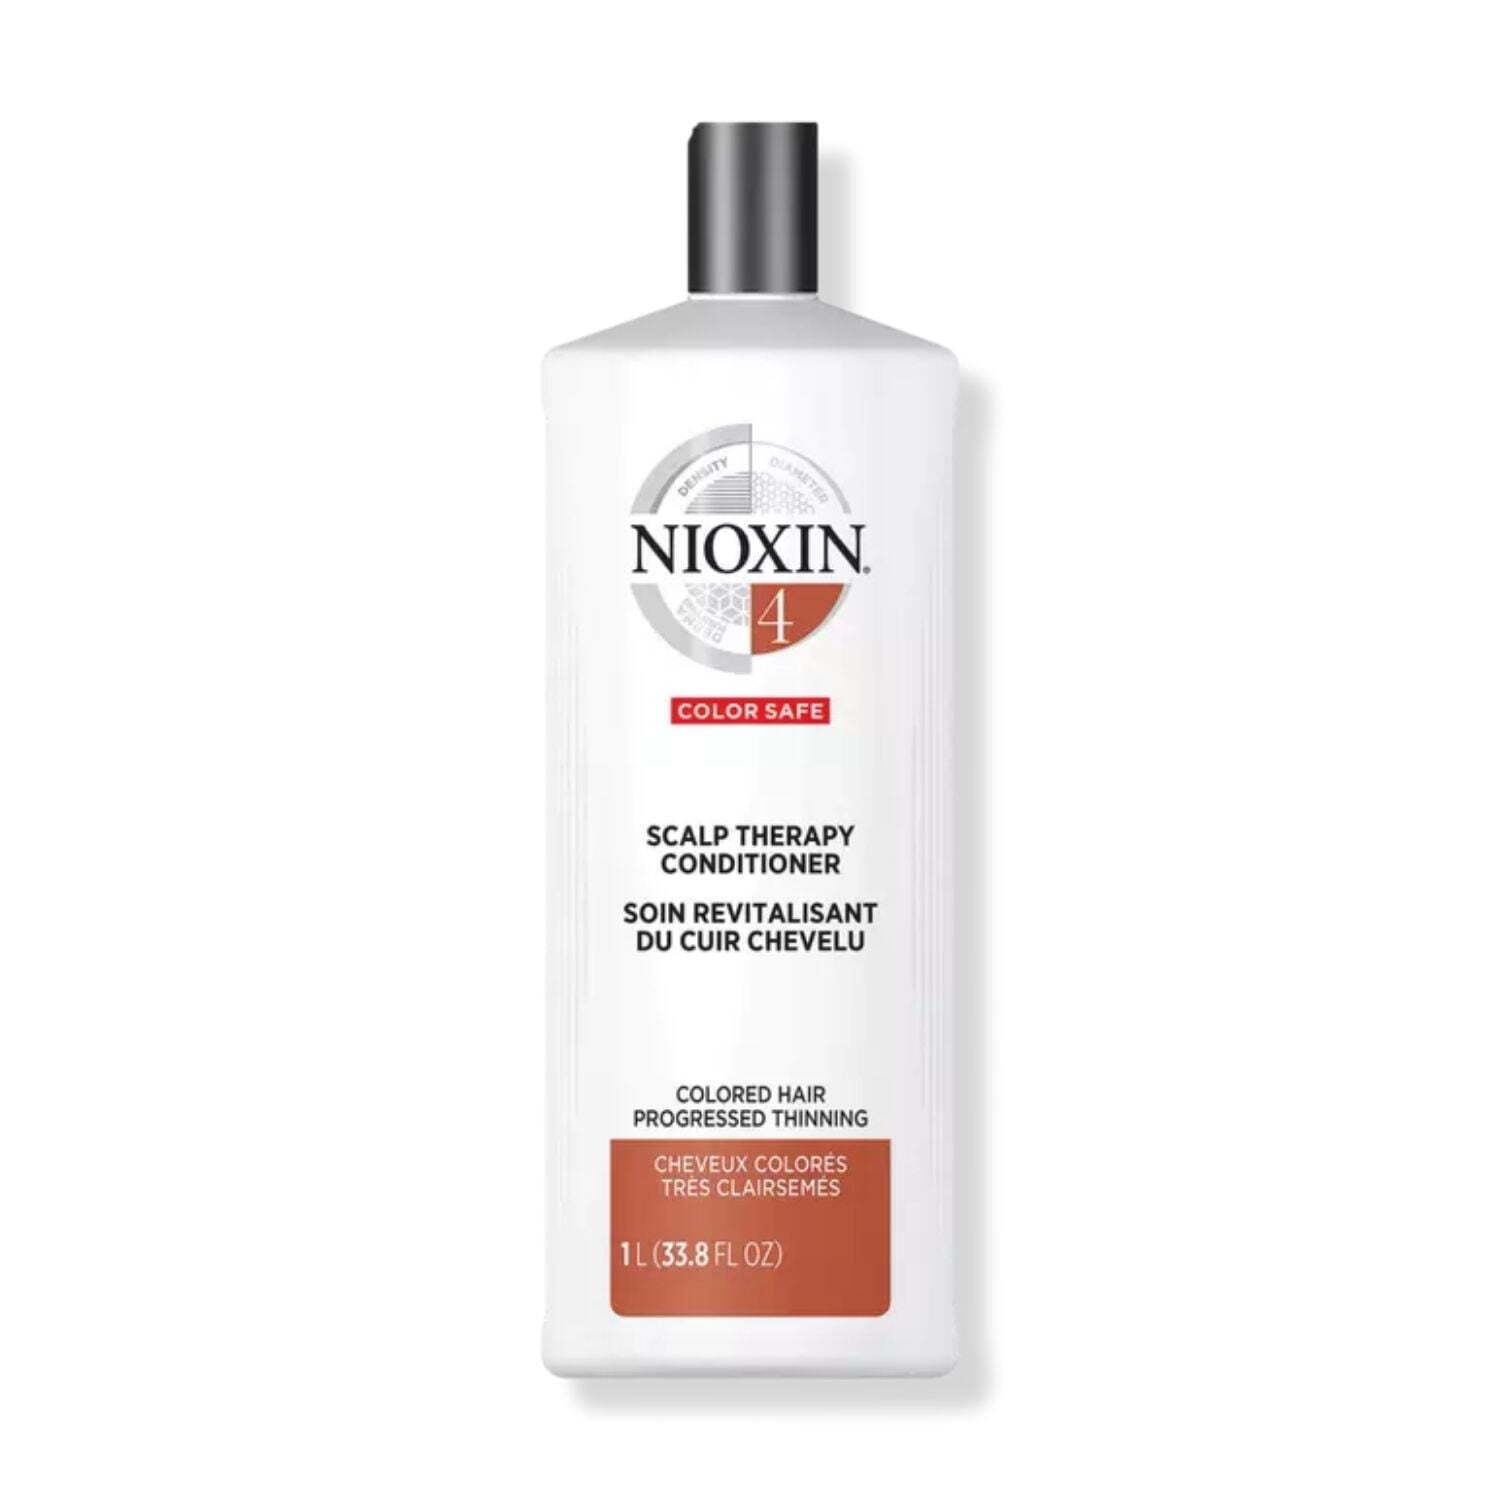 Nioxin System 4 Scalp Therapy Conditioner For Thinning Colored Hair, 33.8 oz